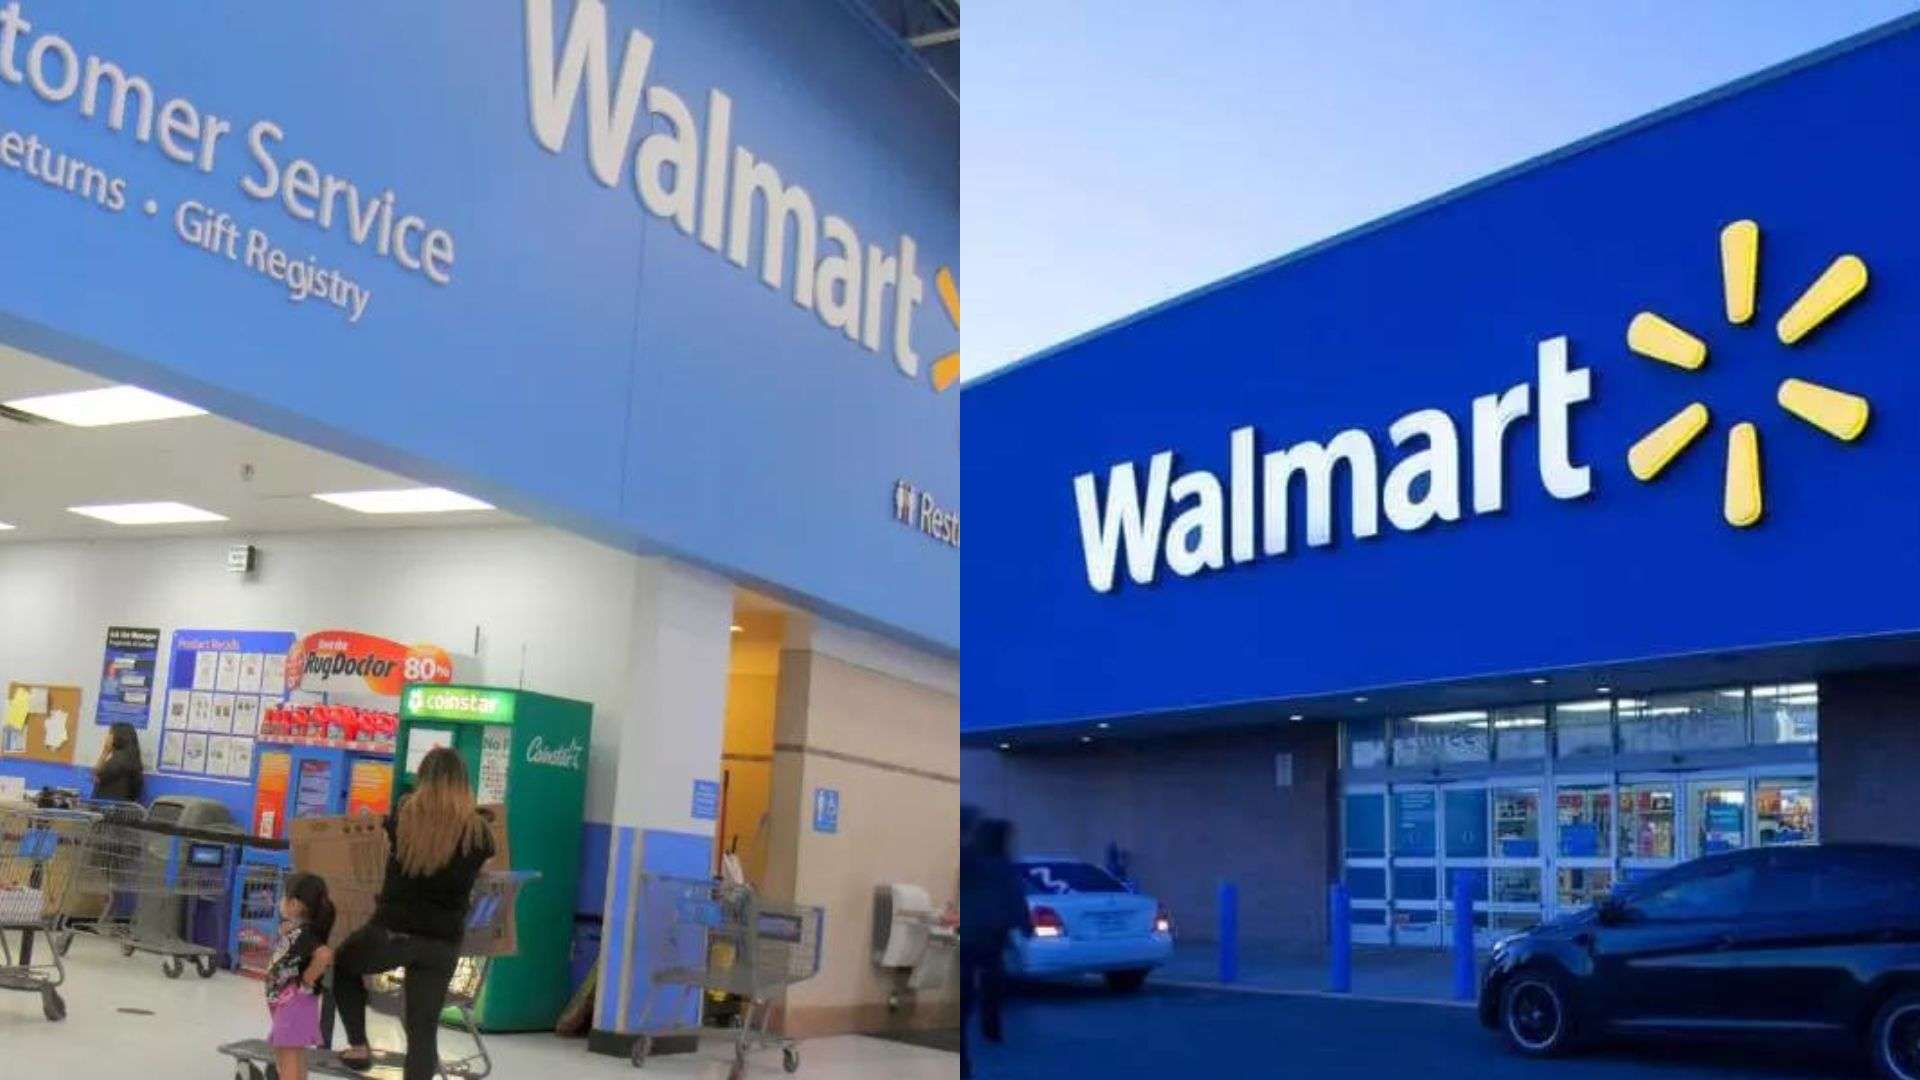 What Time Does Customer Service Close At Walmart?